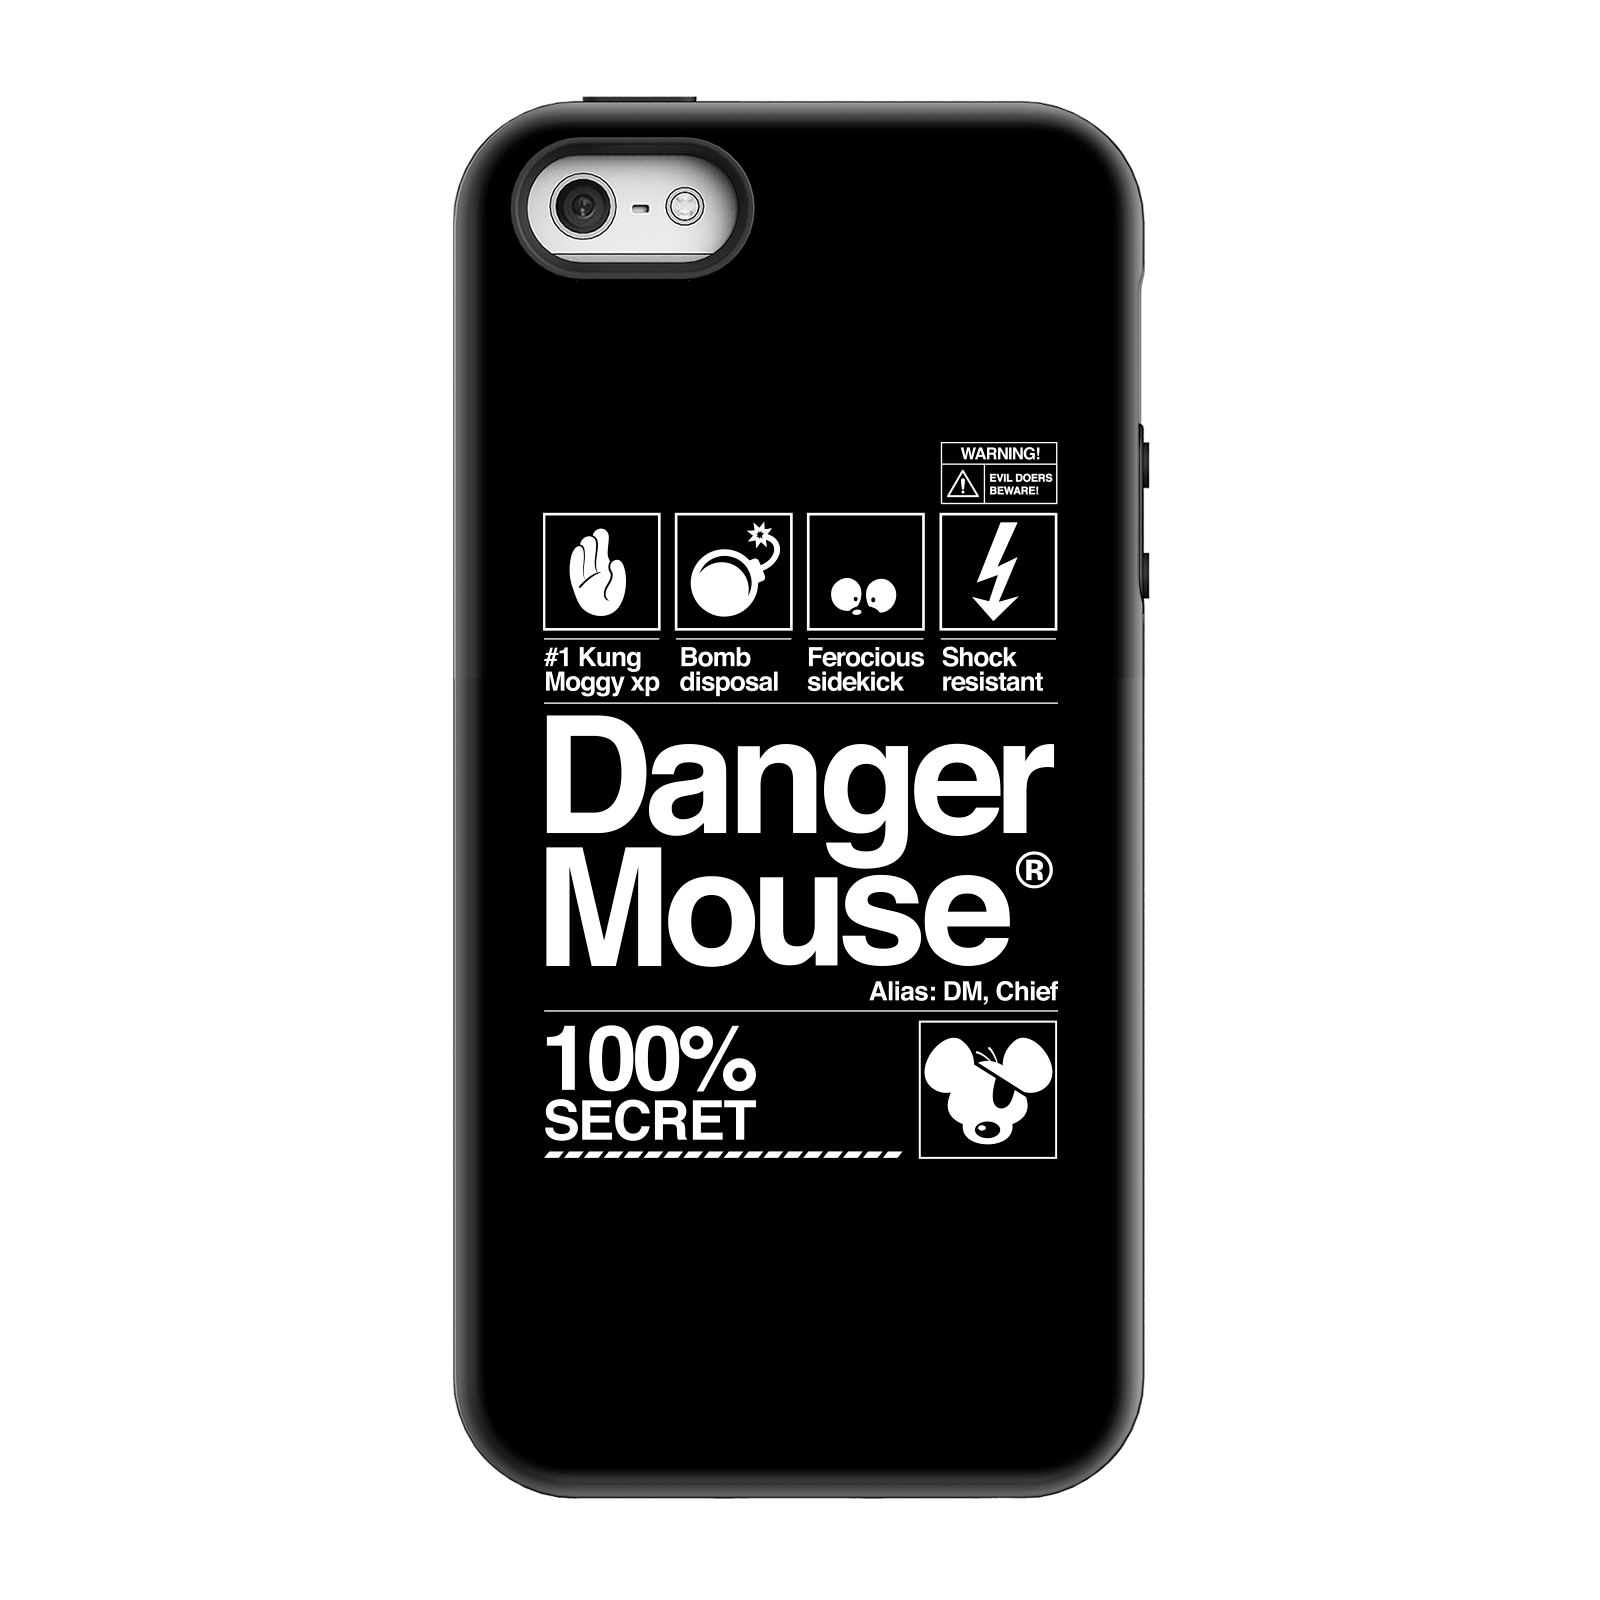 Danger Mouse 100% Secret Phone Case for iPhone and Android - iPhone 5/5s - Tough Case - Matte